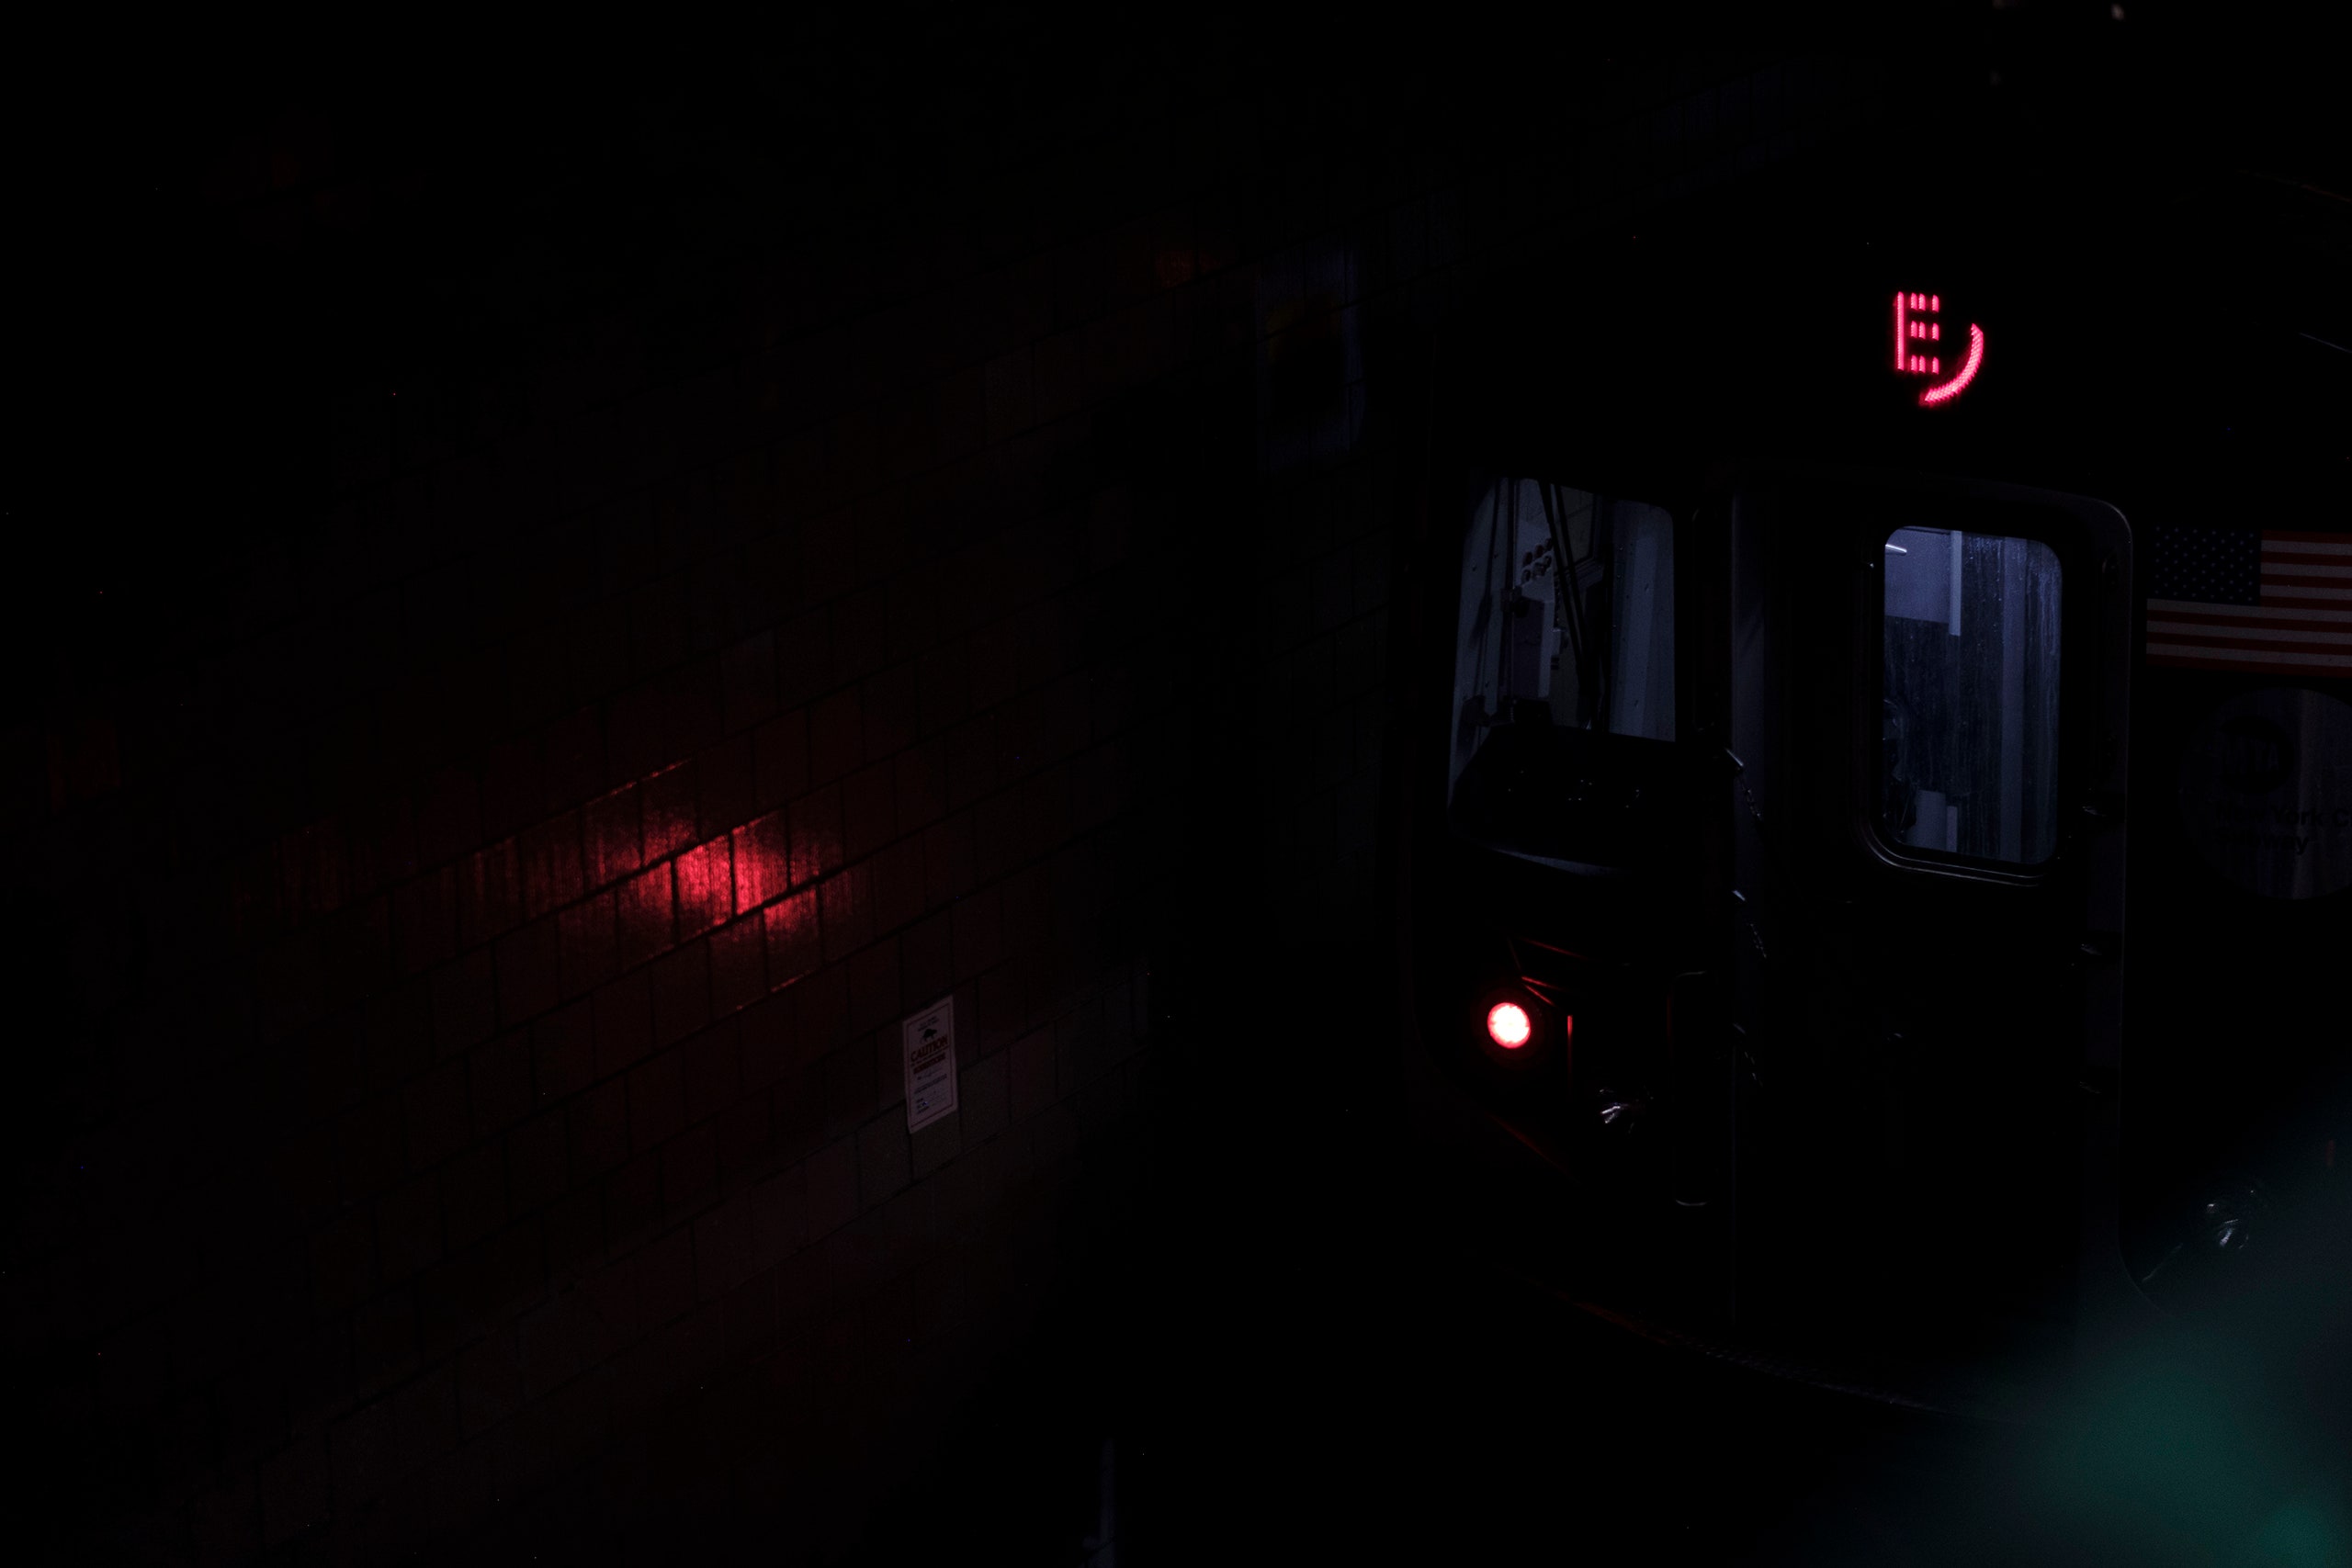 Crime, Anxiety, and the Story of the New York City Subway